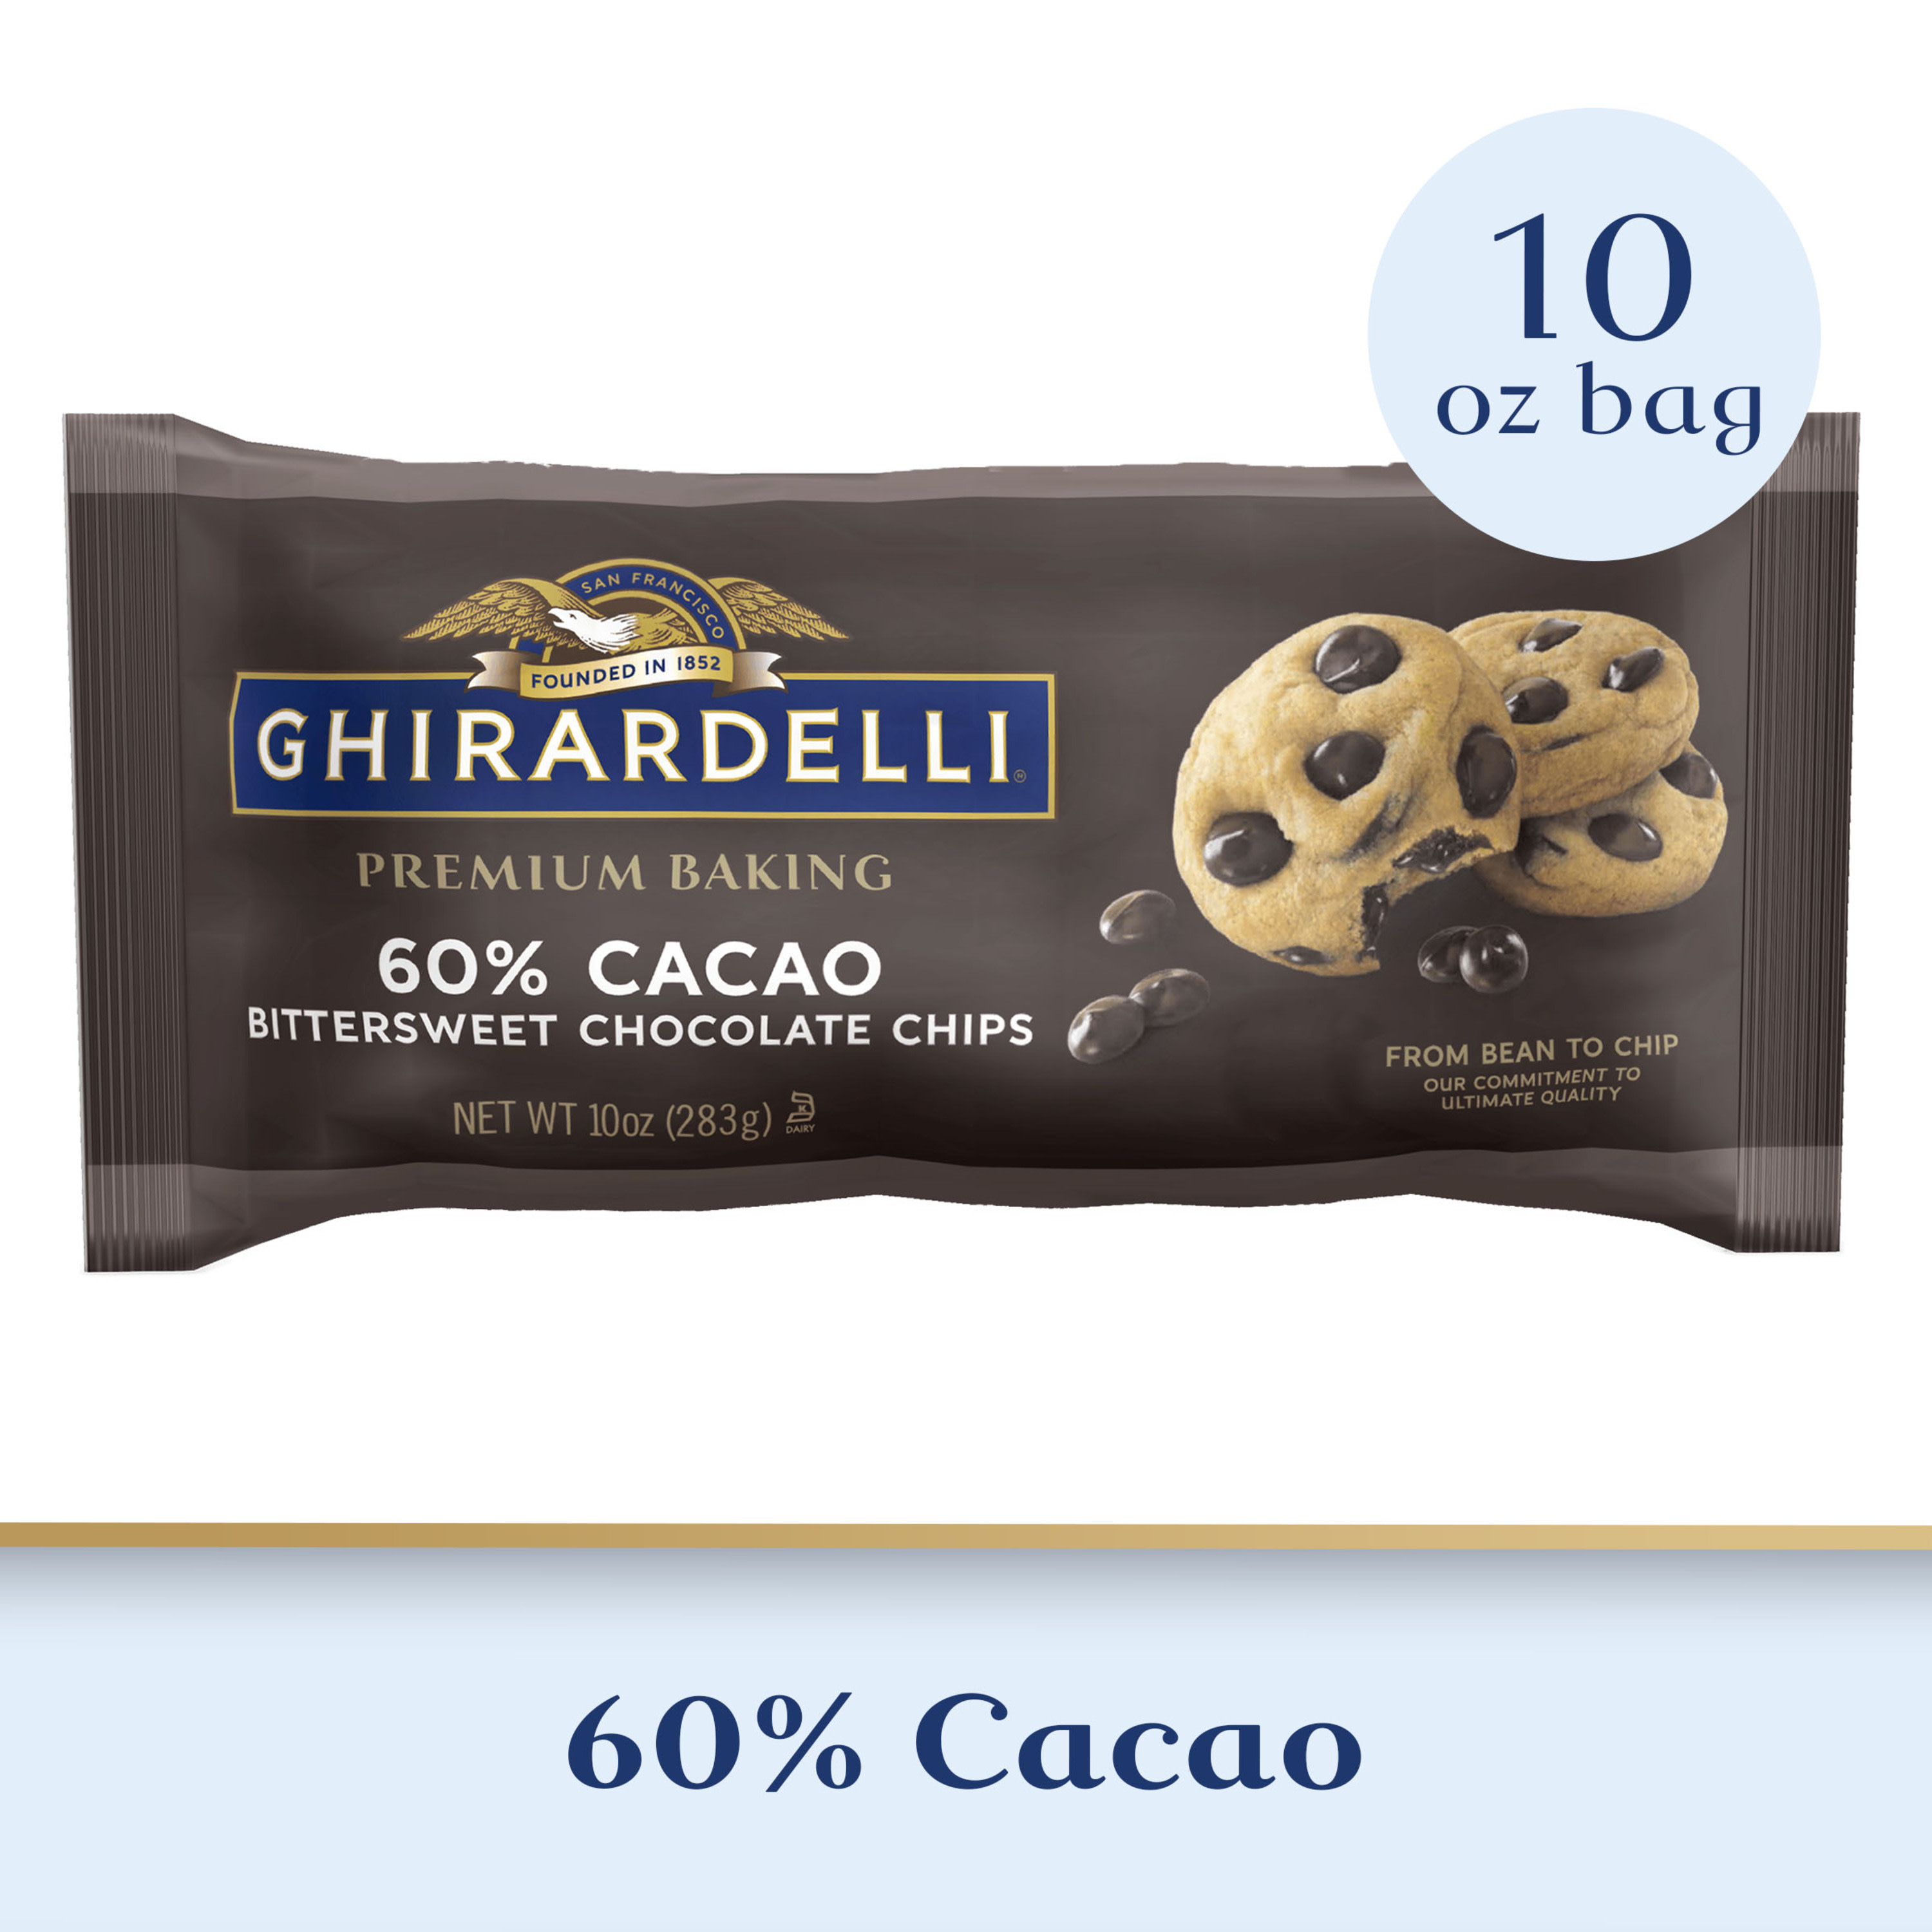 GHIRARDELLI 60% Cacao Bittersweet Chocolate Premium Baking Chips, 10 oz Bag - image 1 of 10